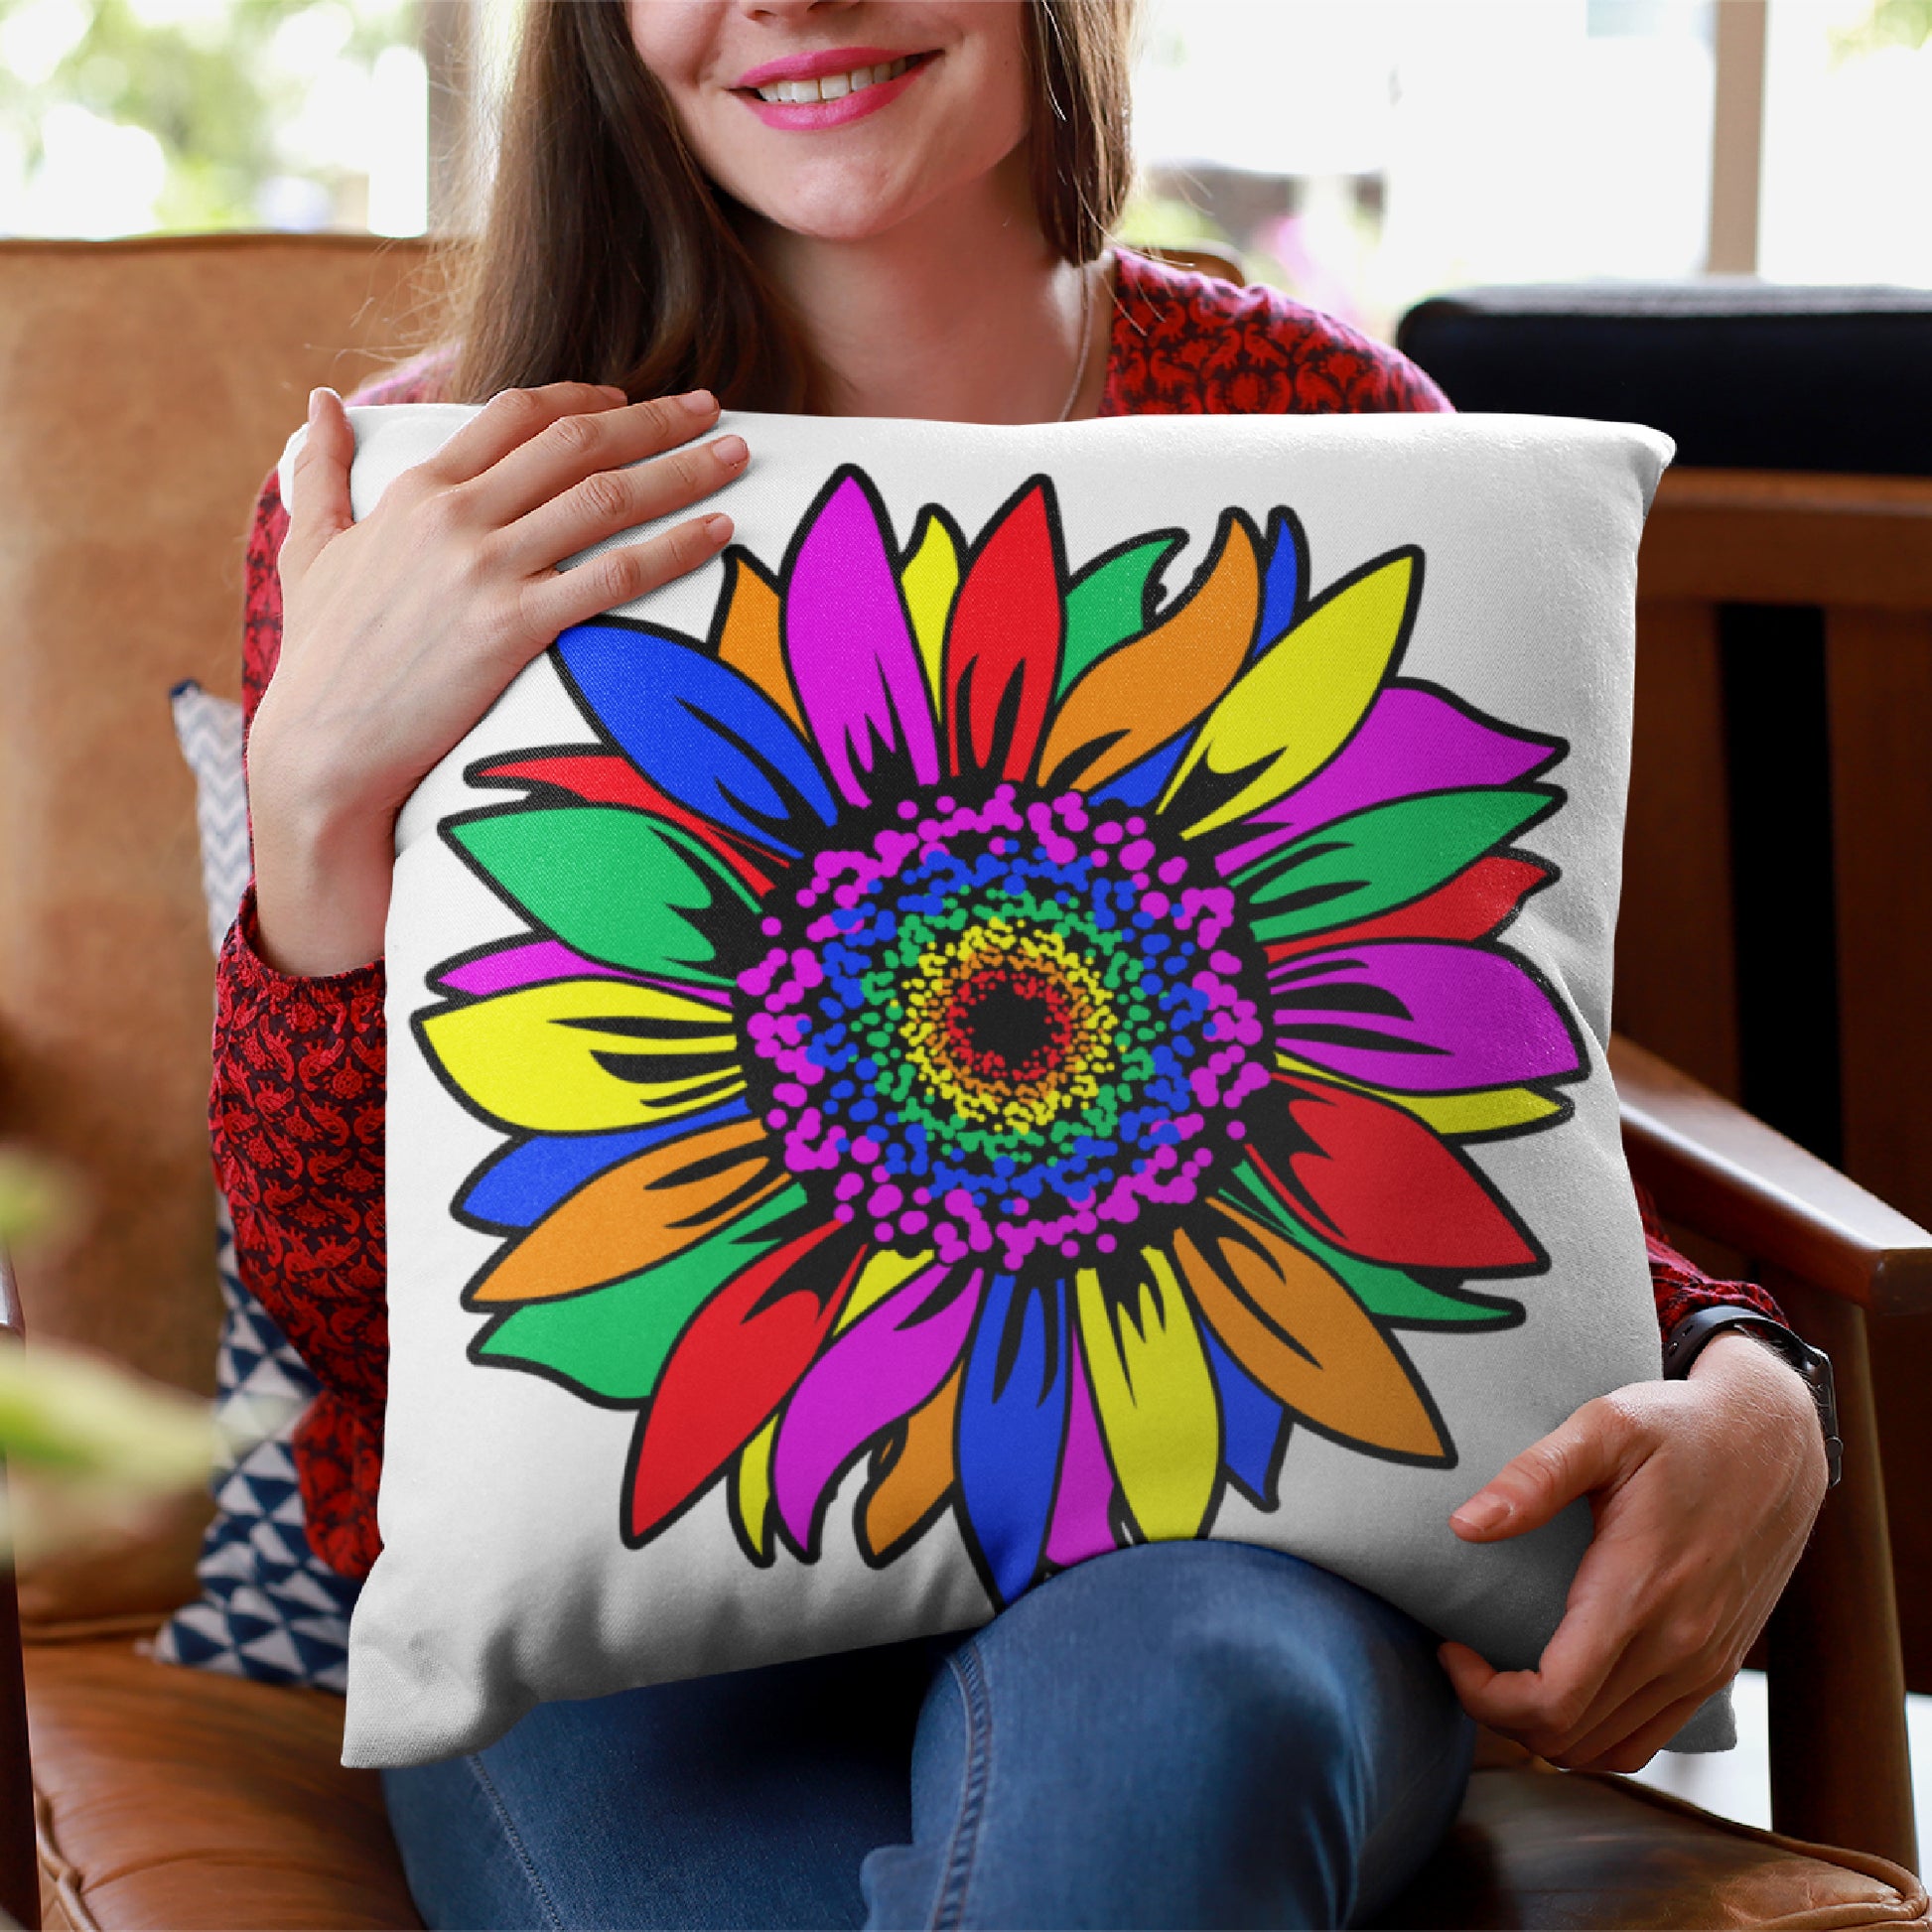 Mock up of a smiling woman holding the 18" pillow